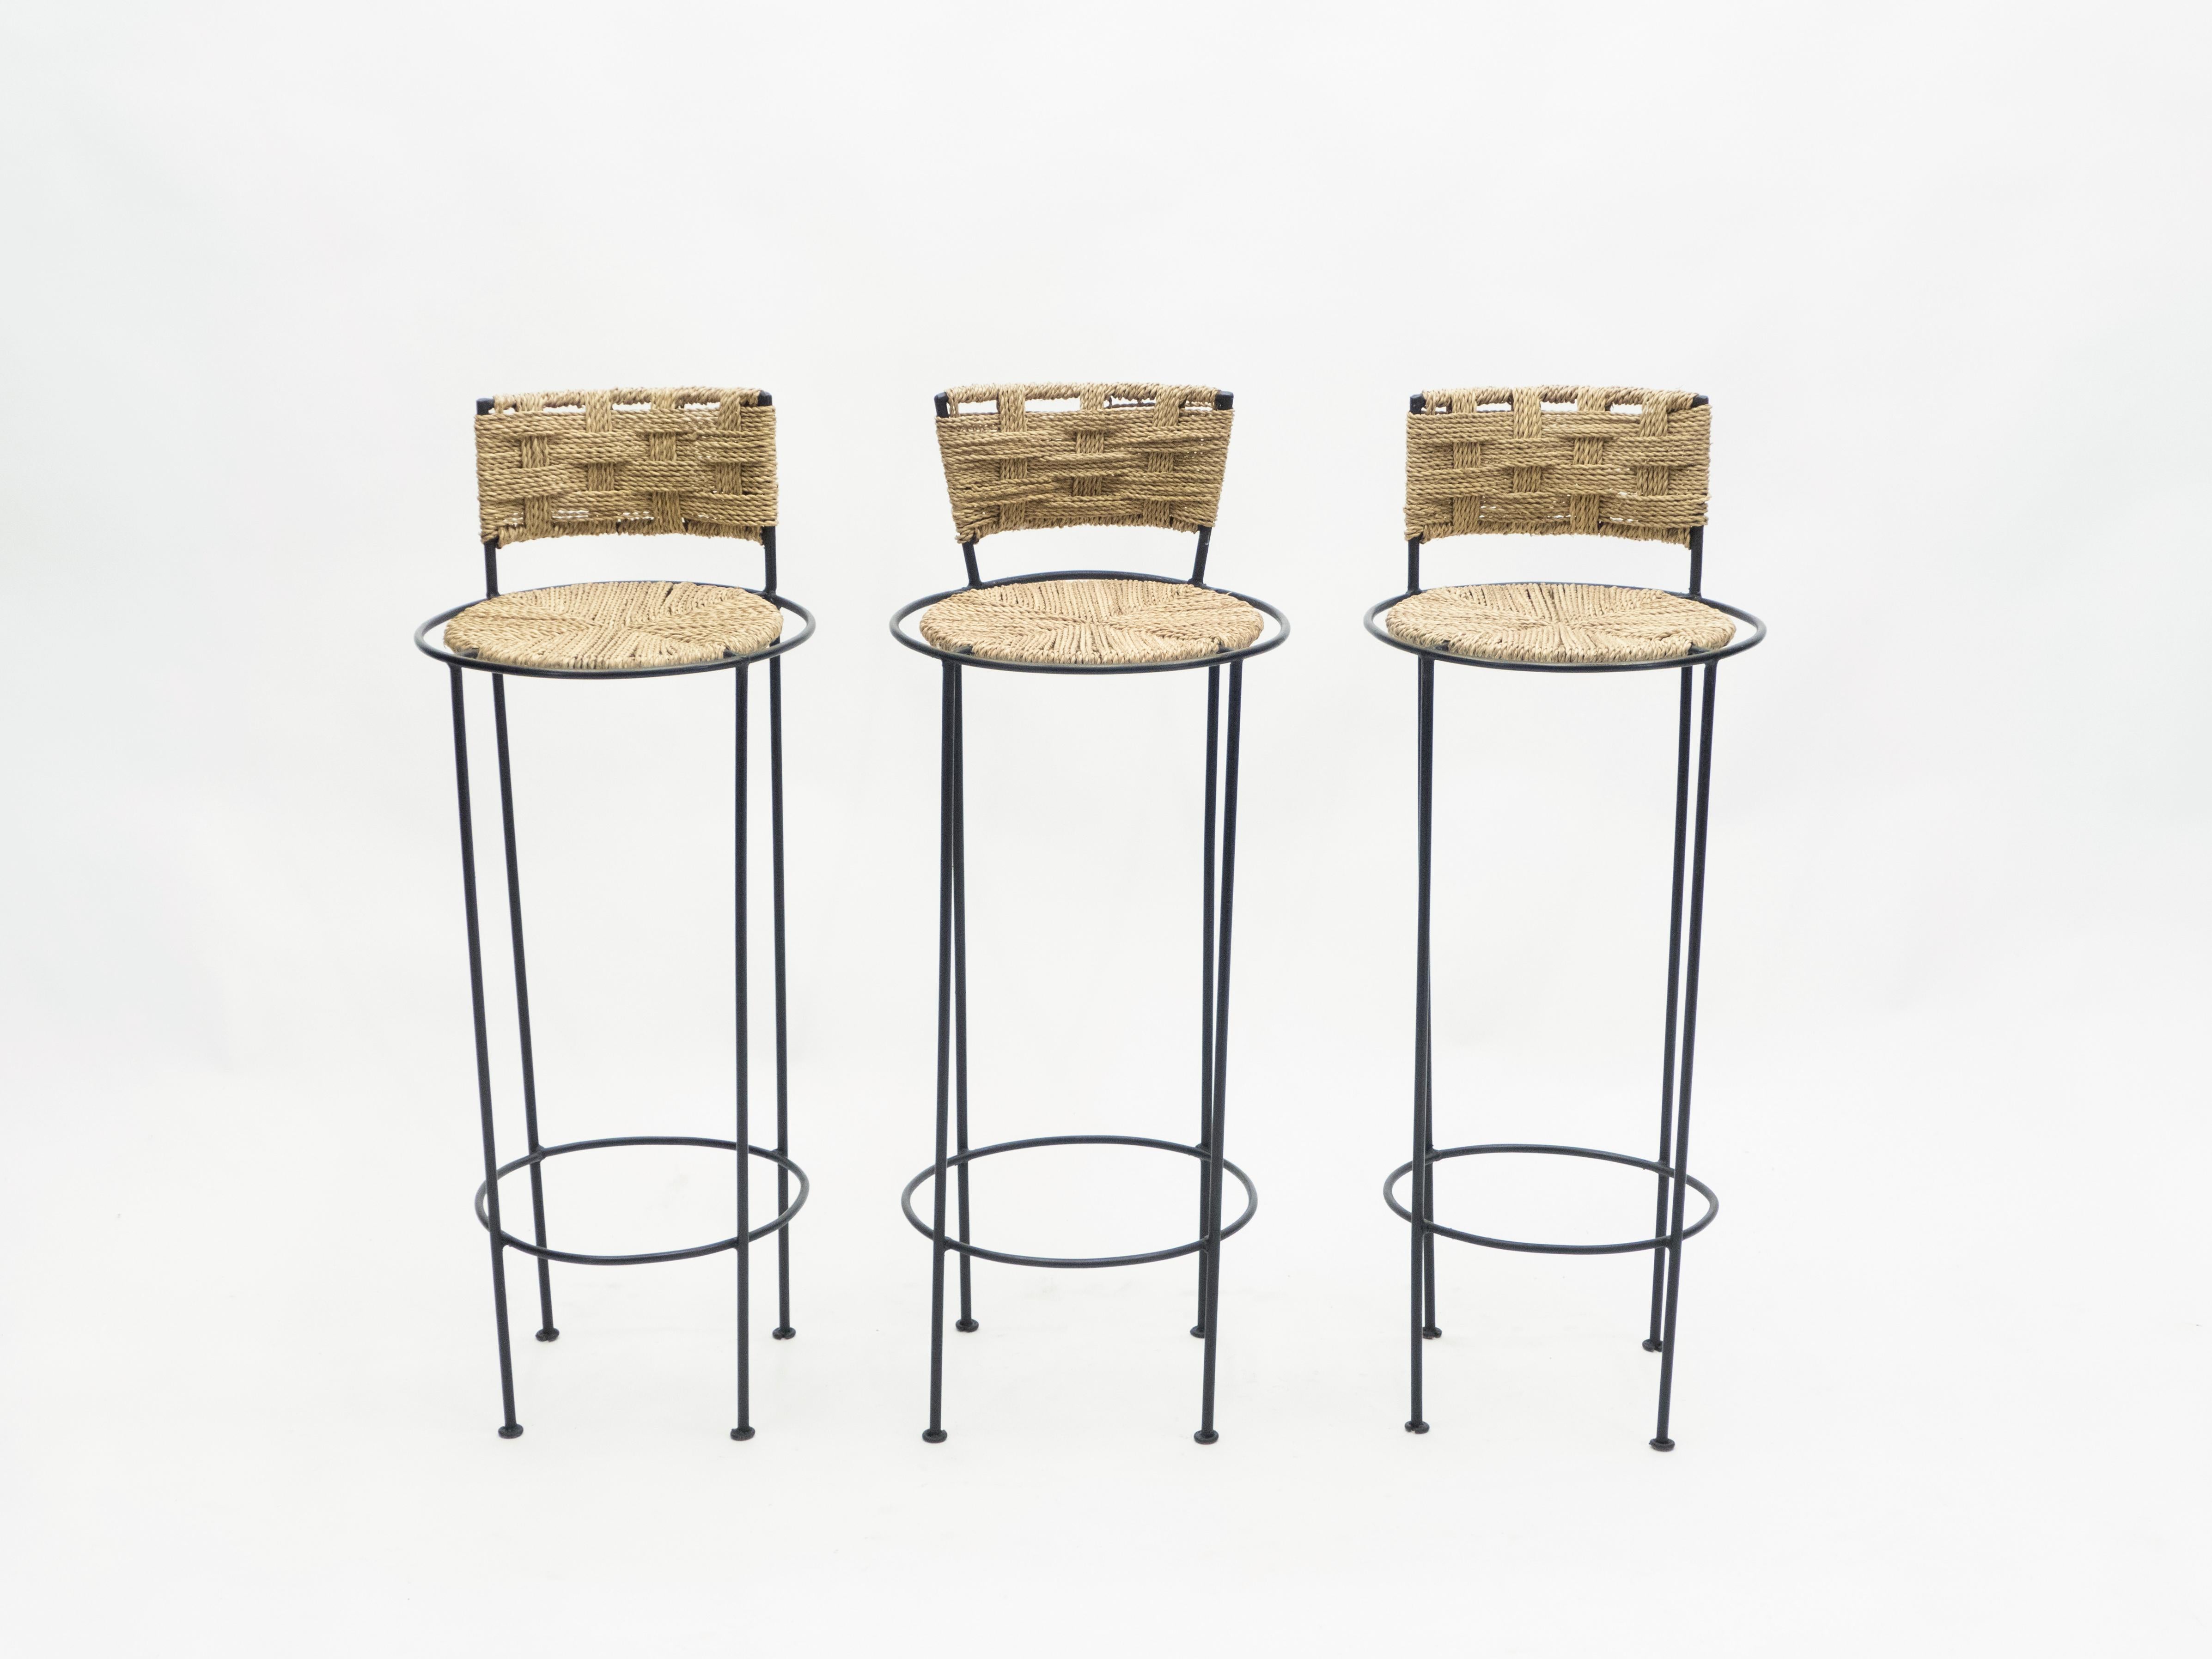 Beautiful patina is evident along the abaca rope seating and backrest of this set of three bar stools by Adrien Audoux et Frida Minet, giving away their vintage status. This natural style is typical of the French design of Audoux-Minet. Timeless